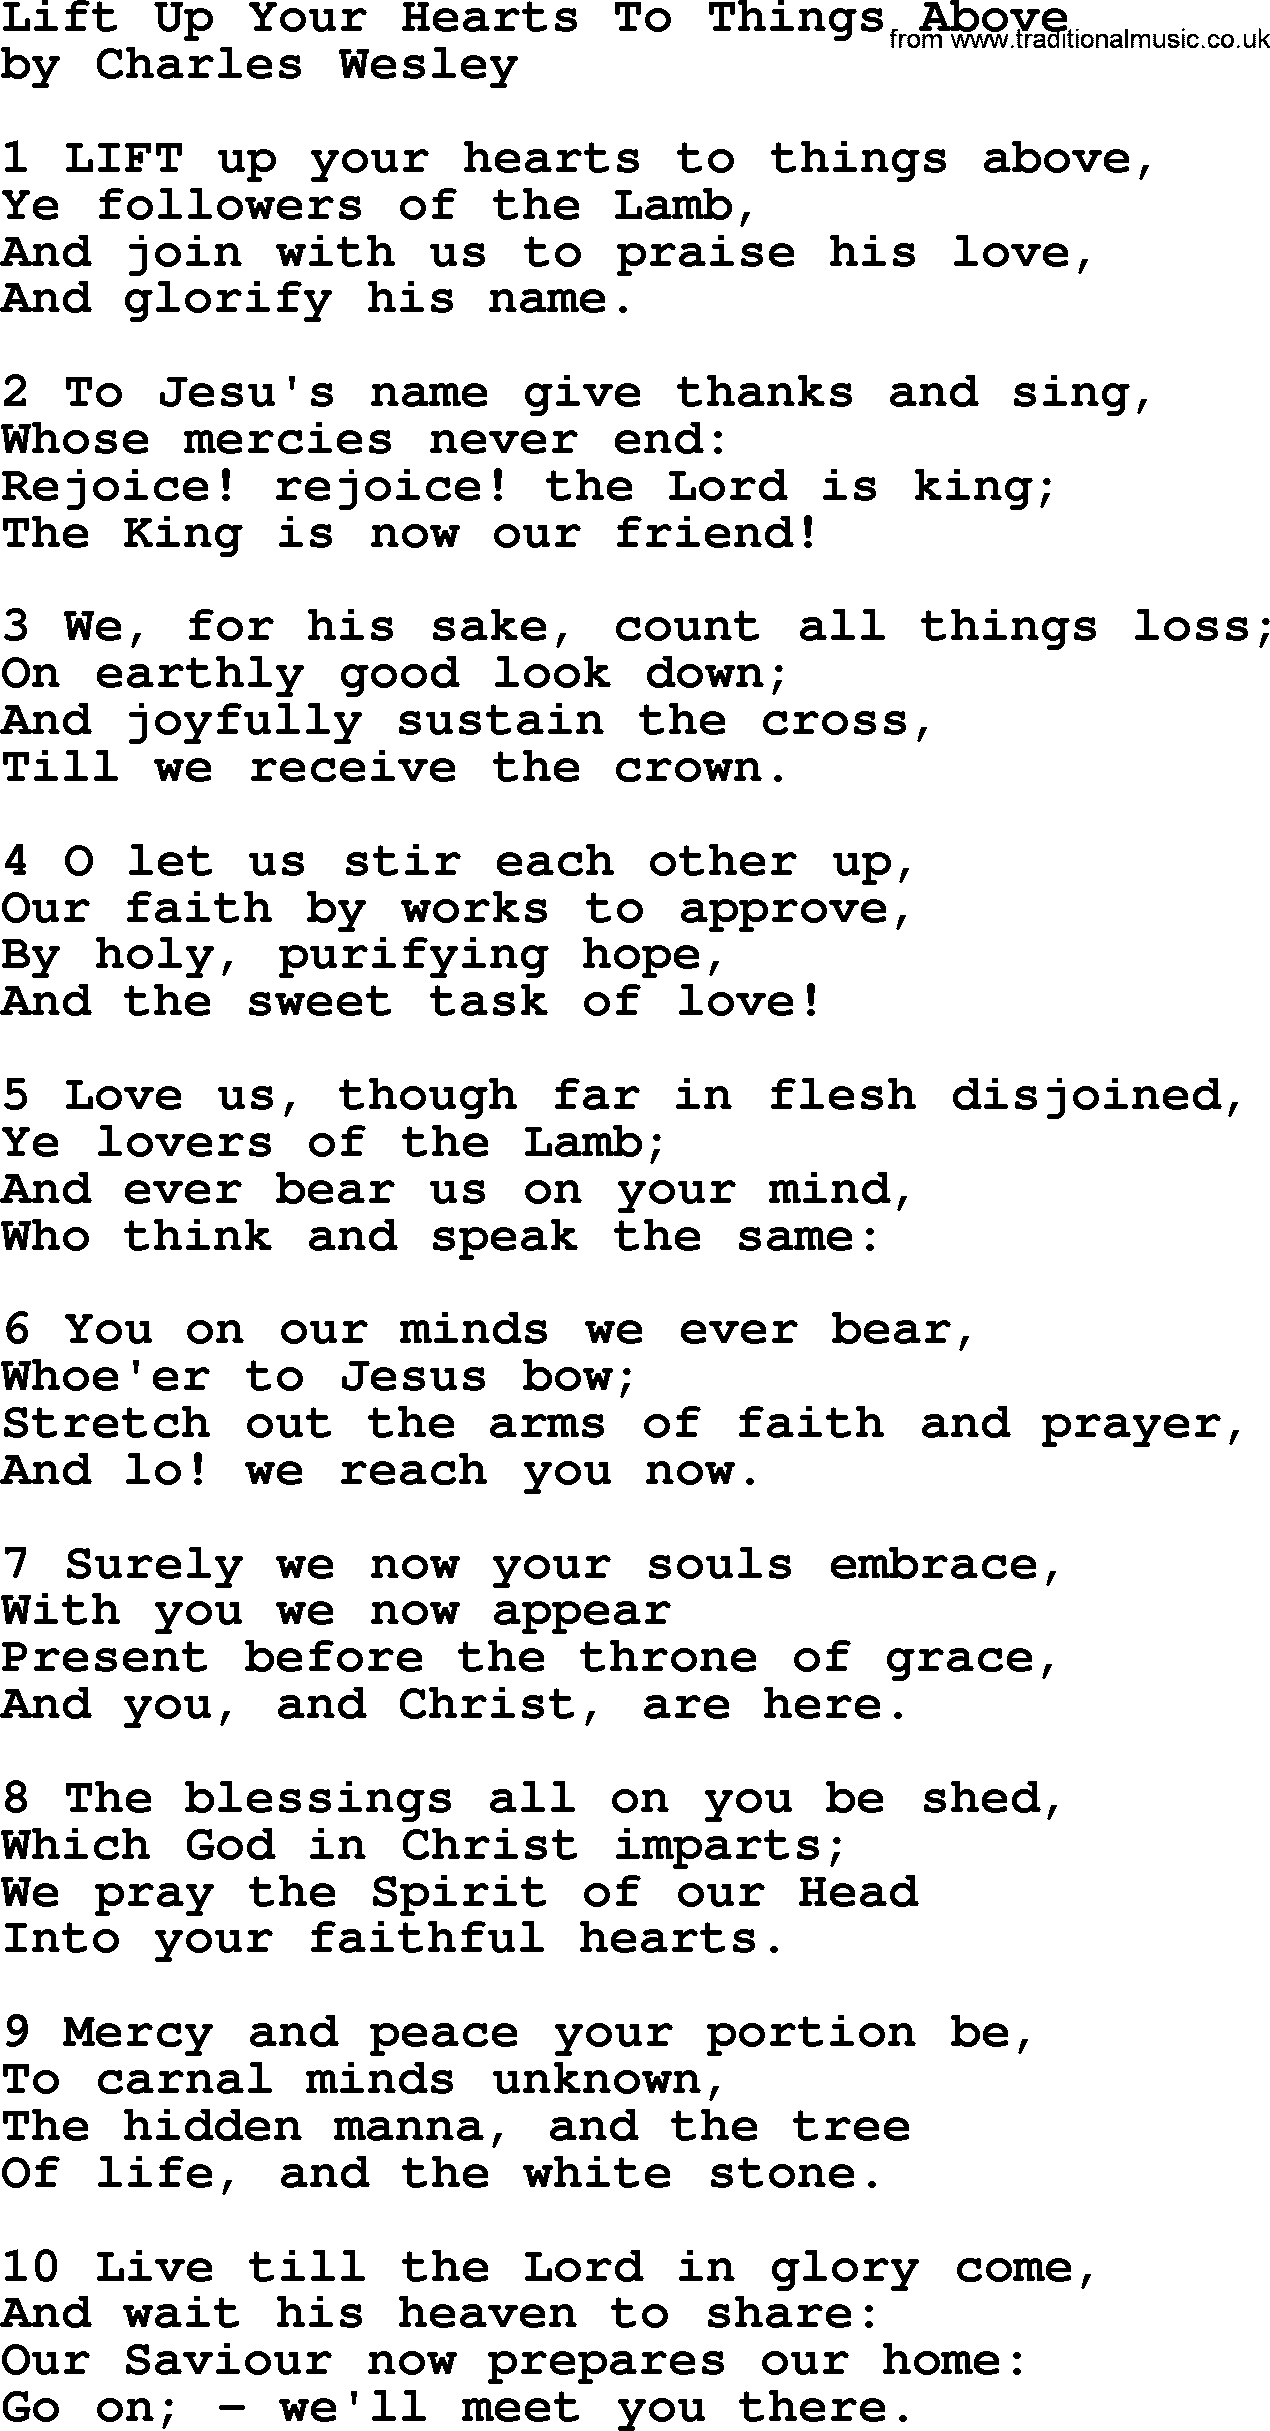 Charles Wesley hymn: Lift Up Your Hearts To Things Above, lyrics